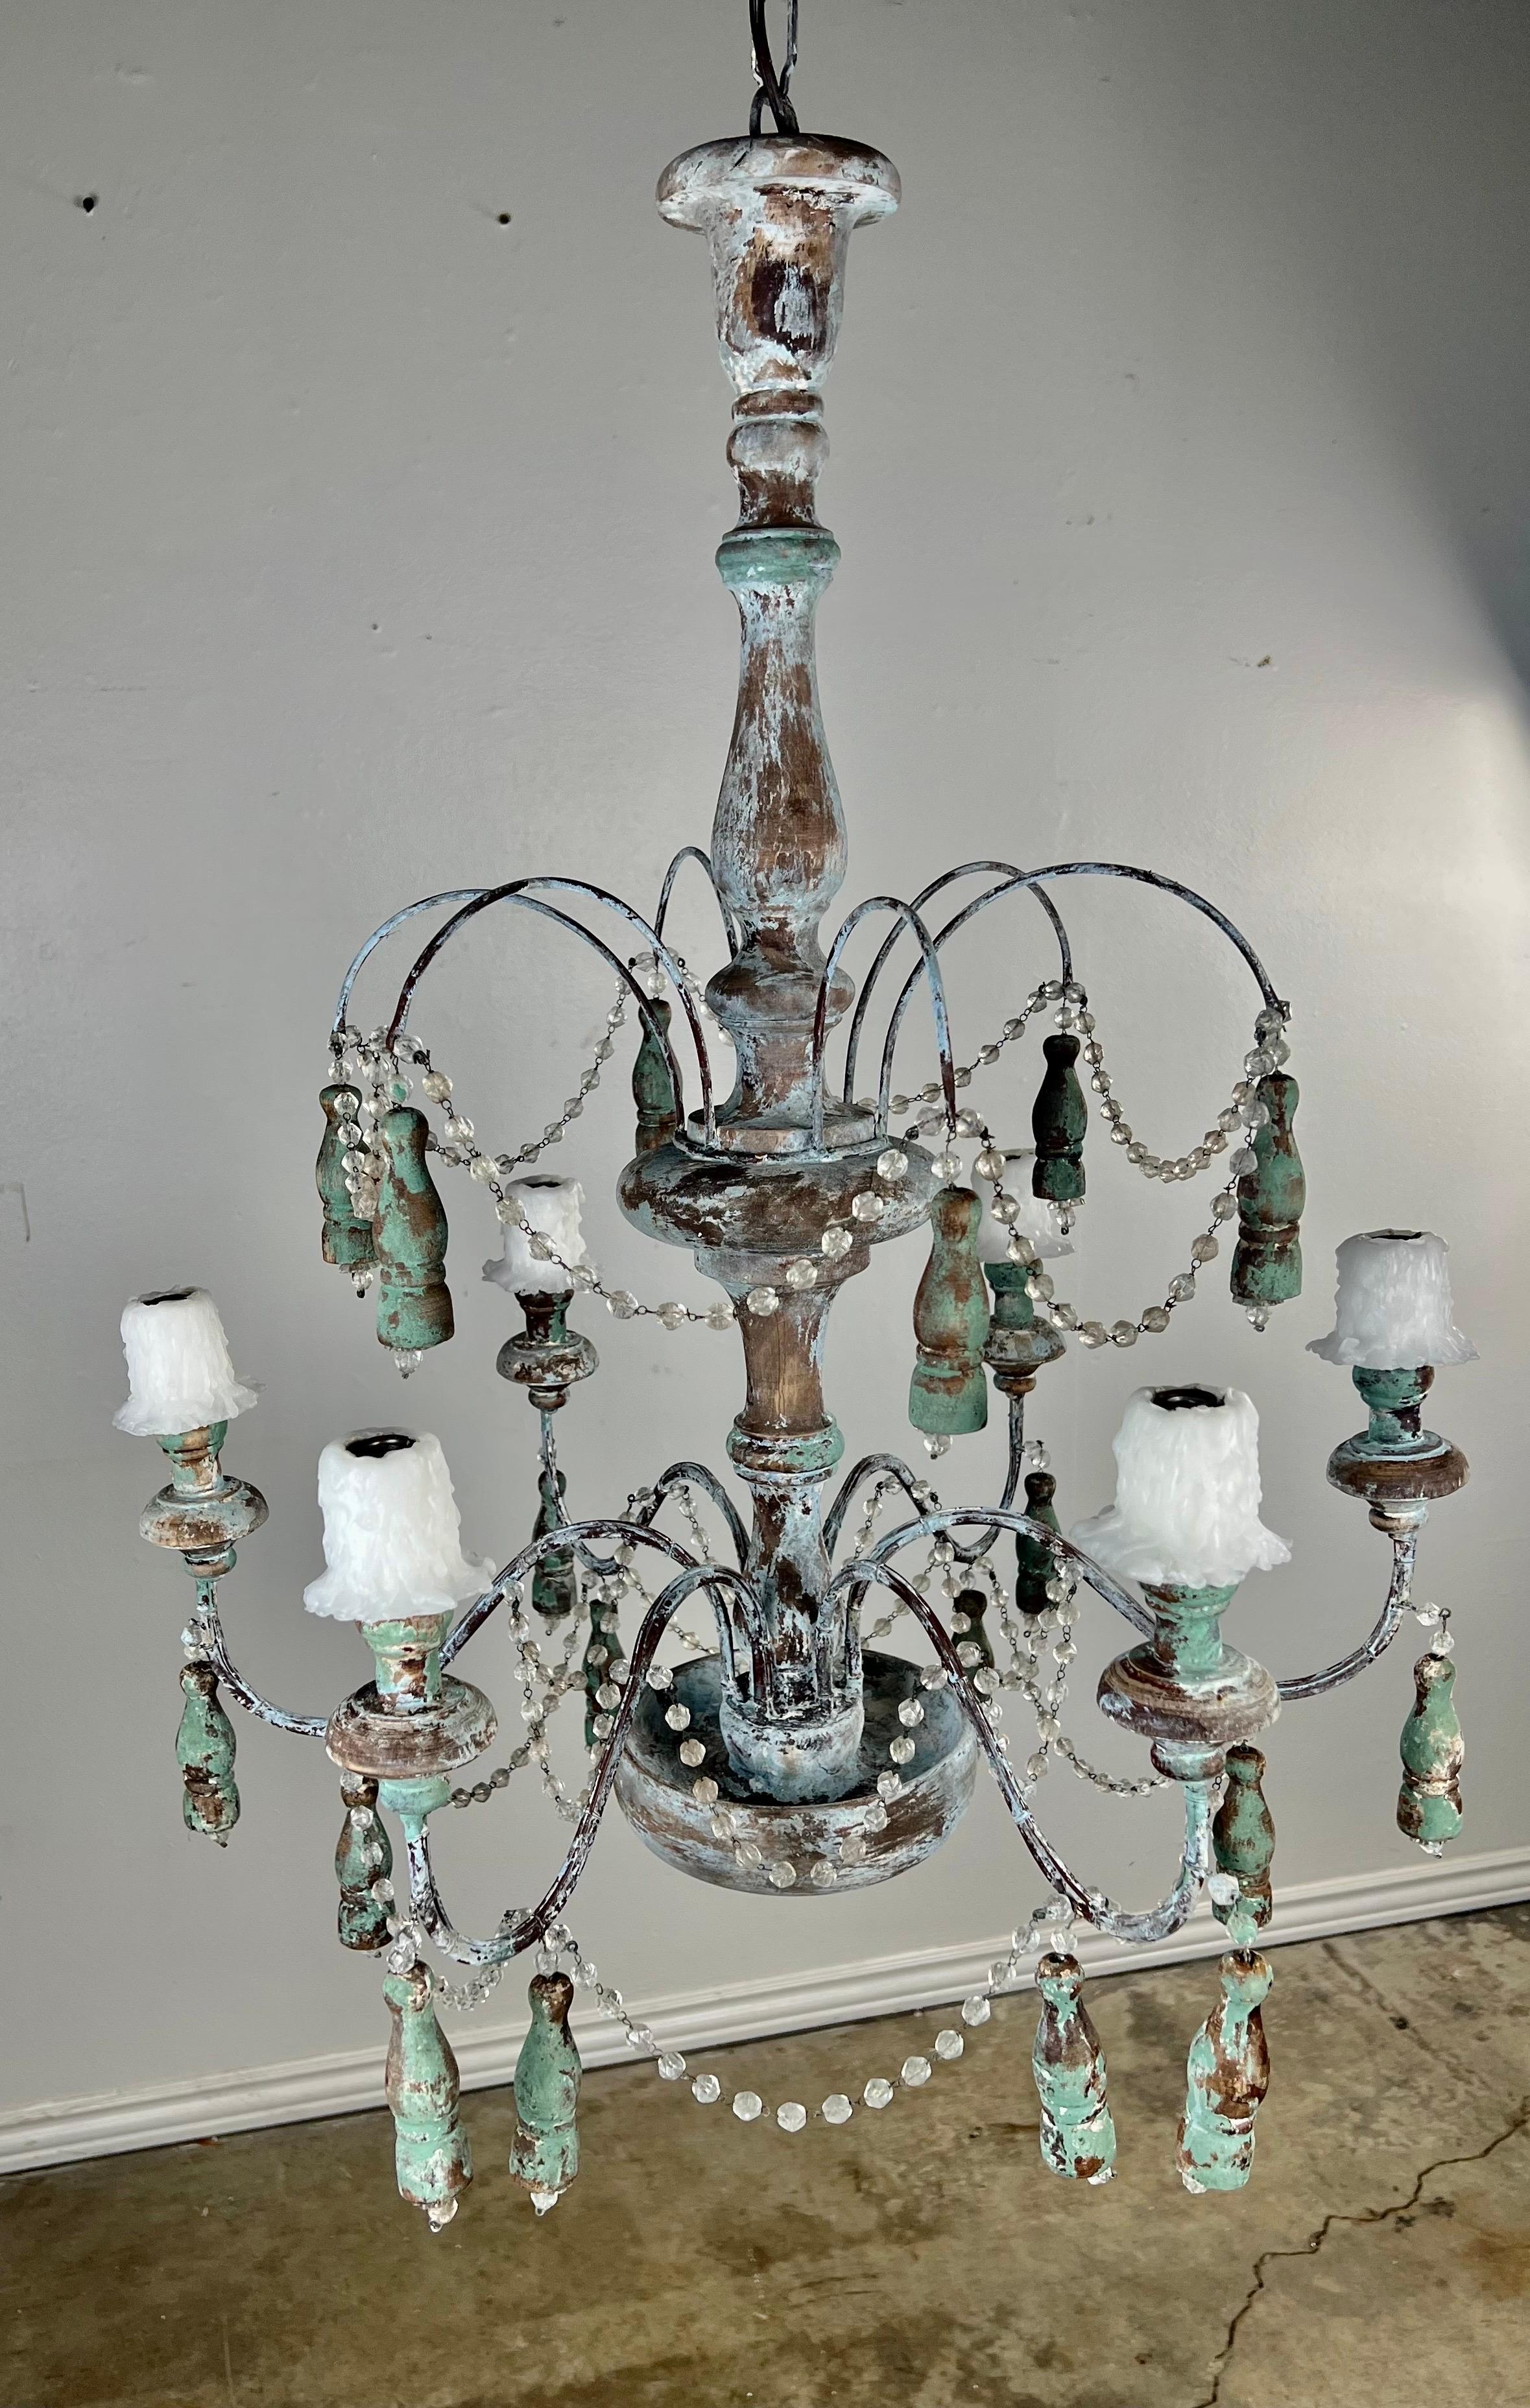 6-Light Chandelier with iron & wood tassel drops throughout.  There are only remnants of paint left on the fixture in a stunning green/blue coloration.  There are garlands of English Cut Beads.  The chandelier is newly wired and includes chain &